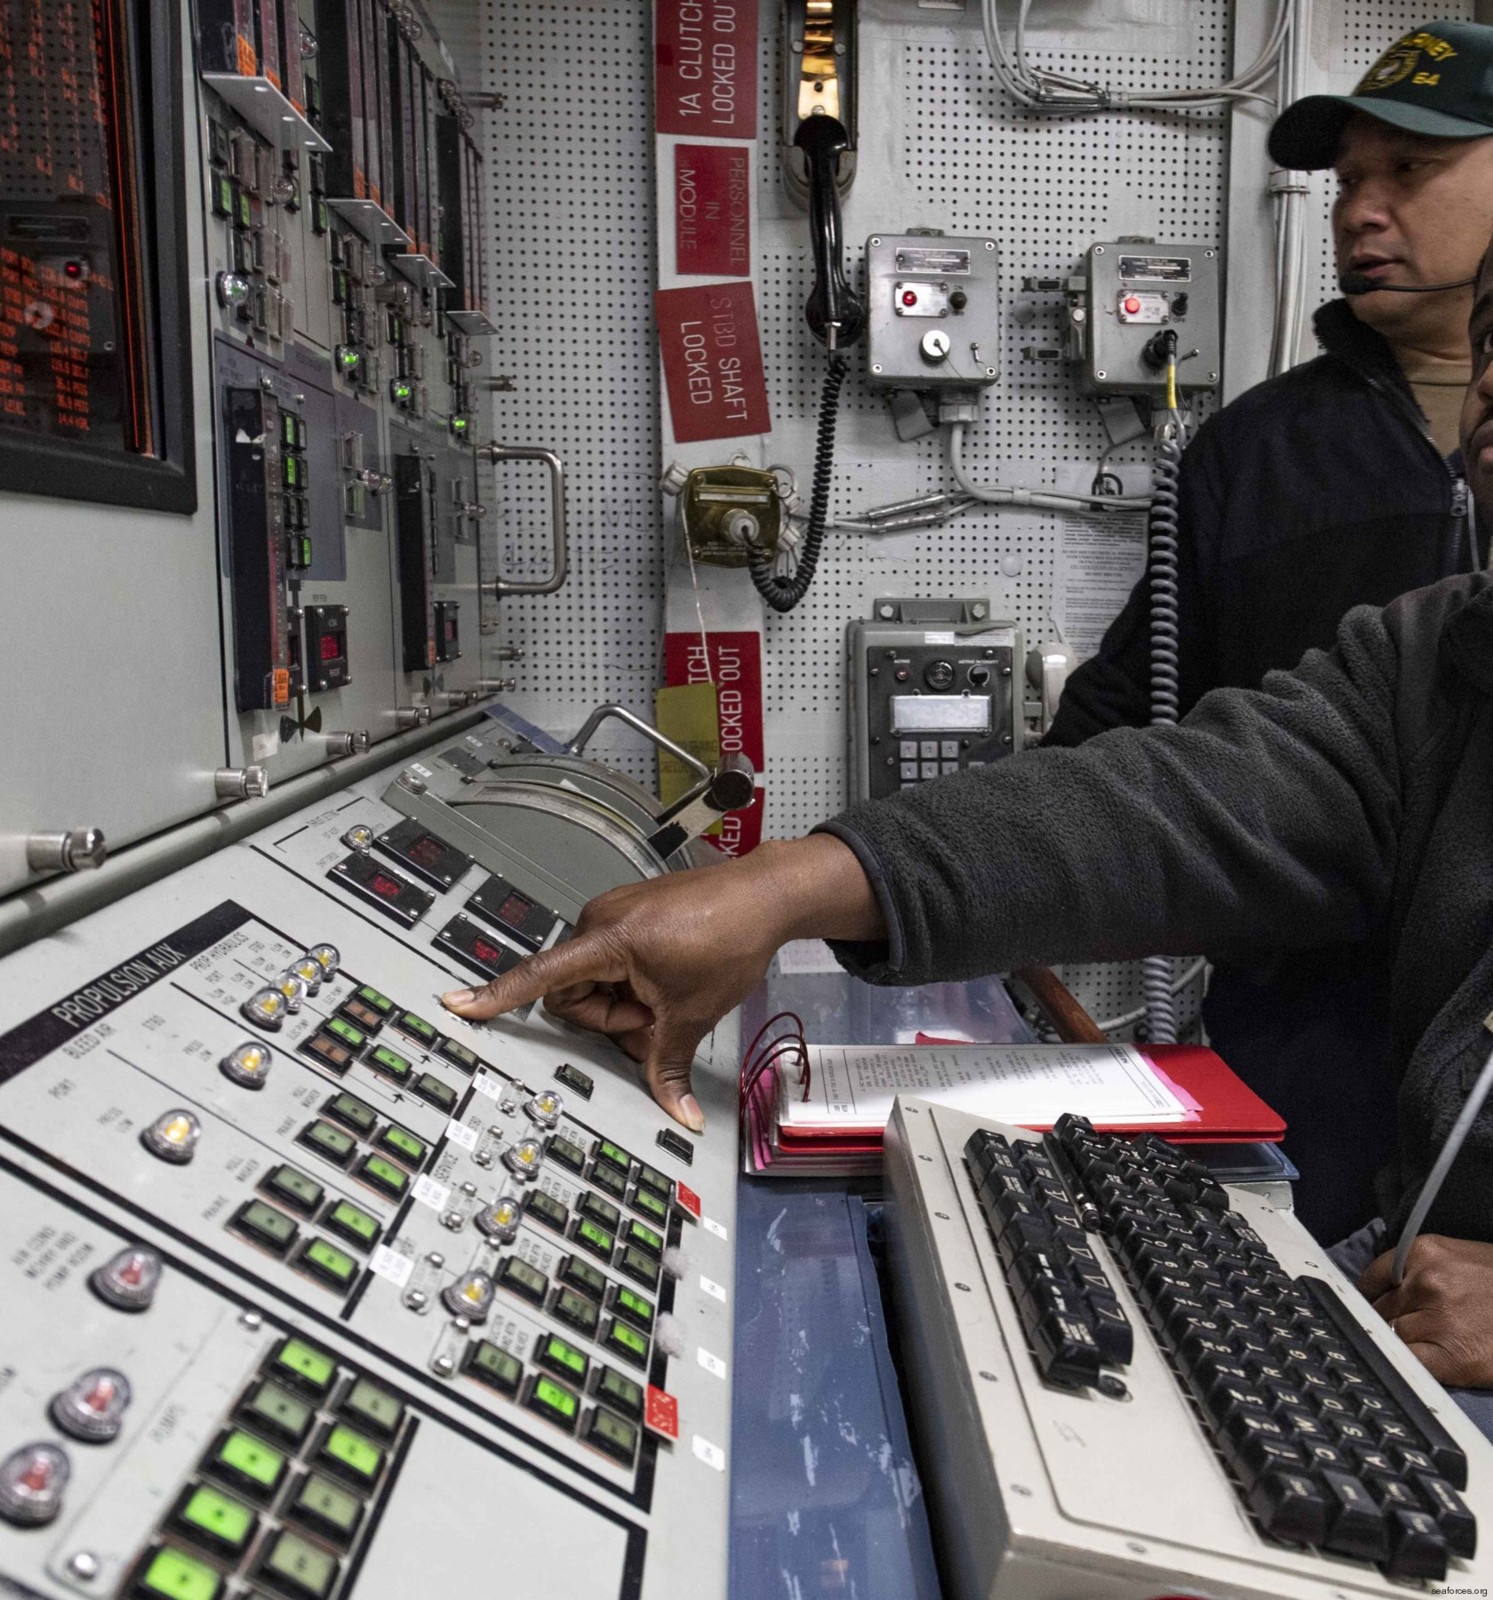 ddg-64 uss carney guided missile destroyer arleigh burke class 98 control room console engineering propulsion